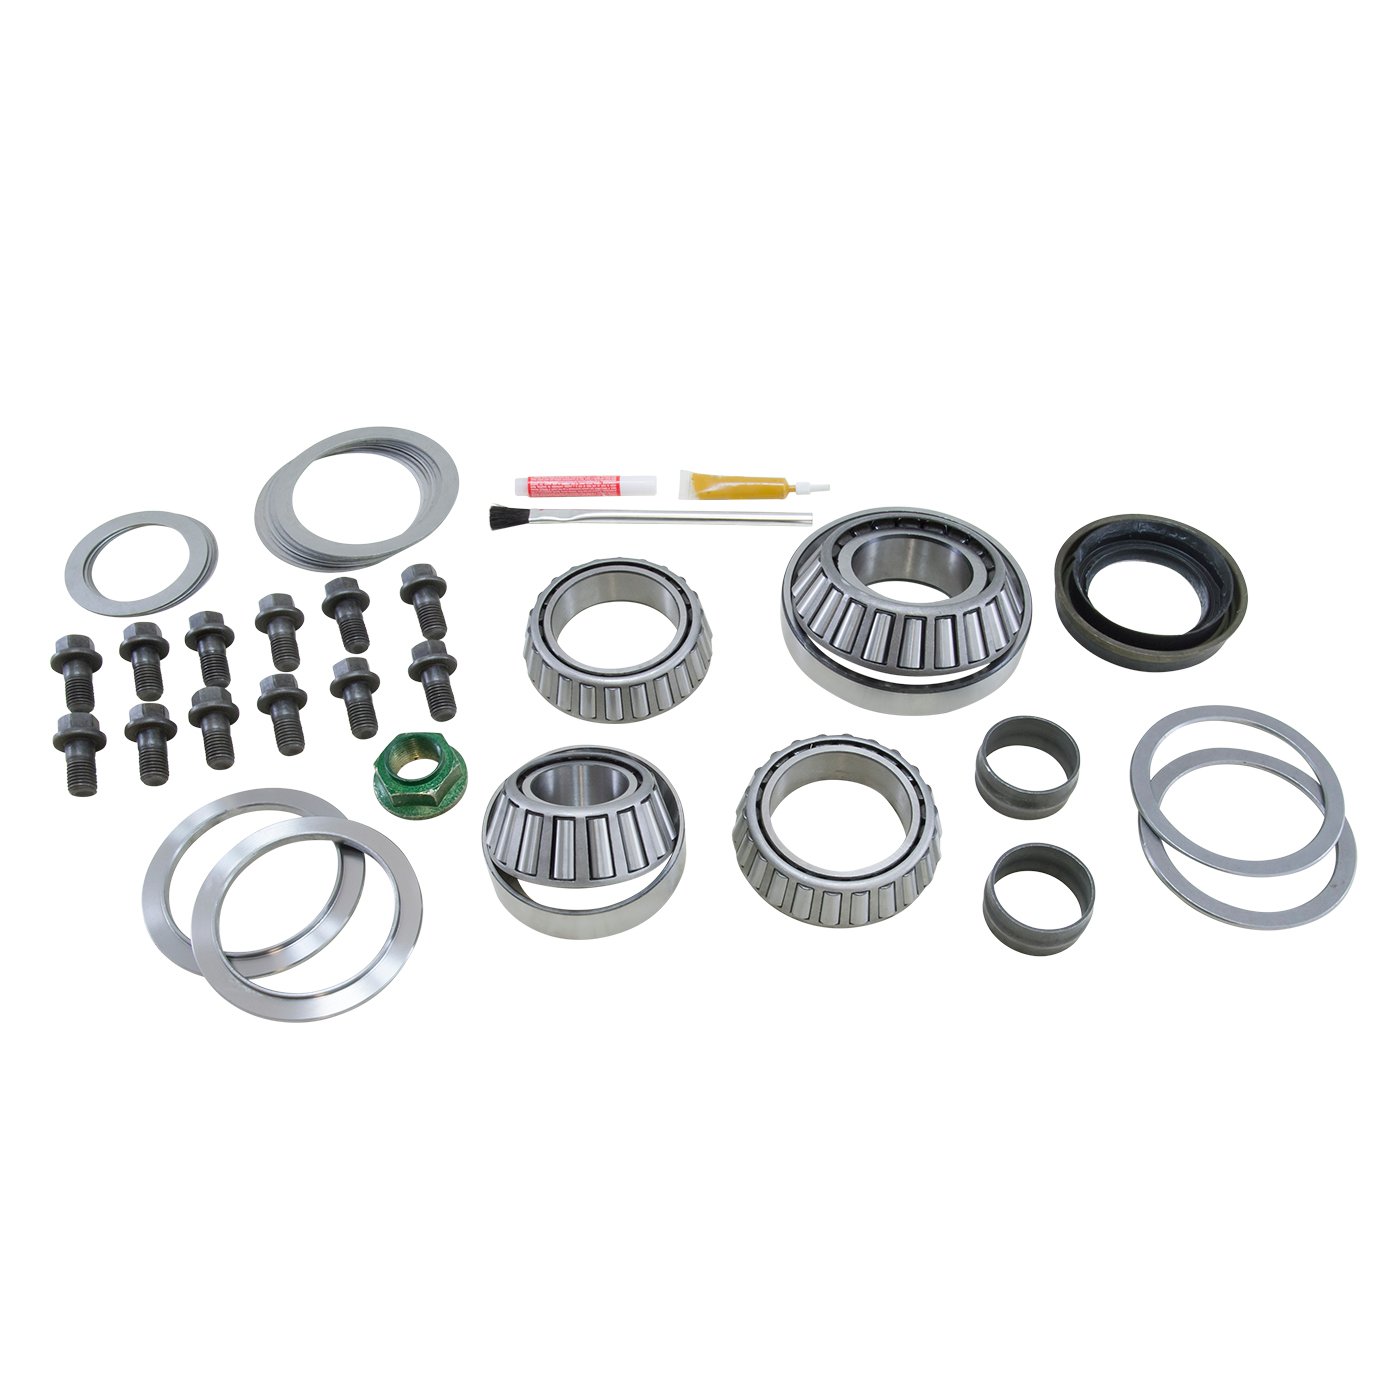 USA Standard ZK GM9.5-B Master Overhaul Kit, For '97-'13 GM 9.5 in. Differential